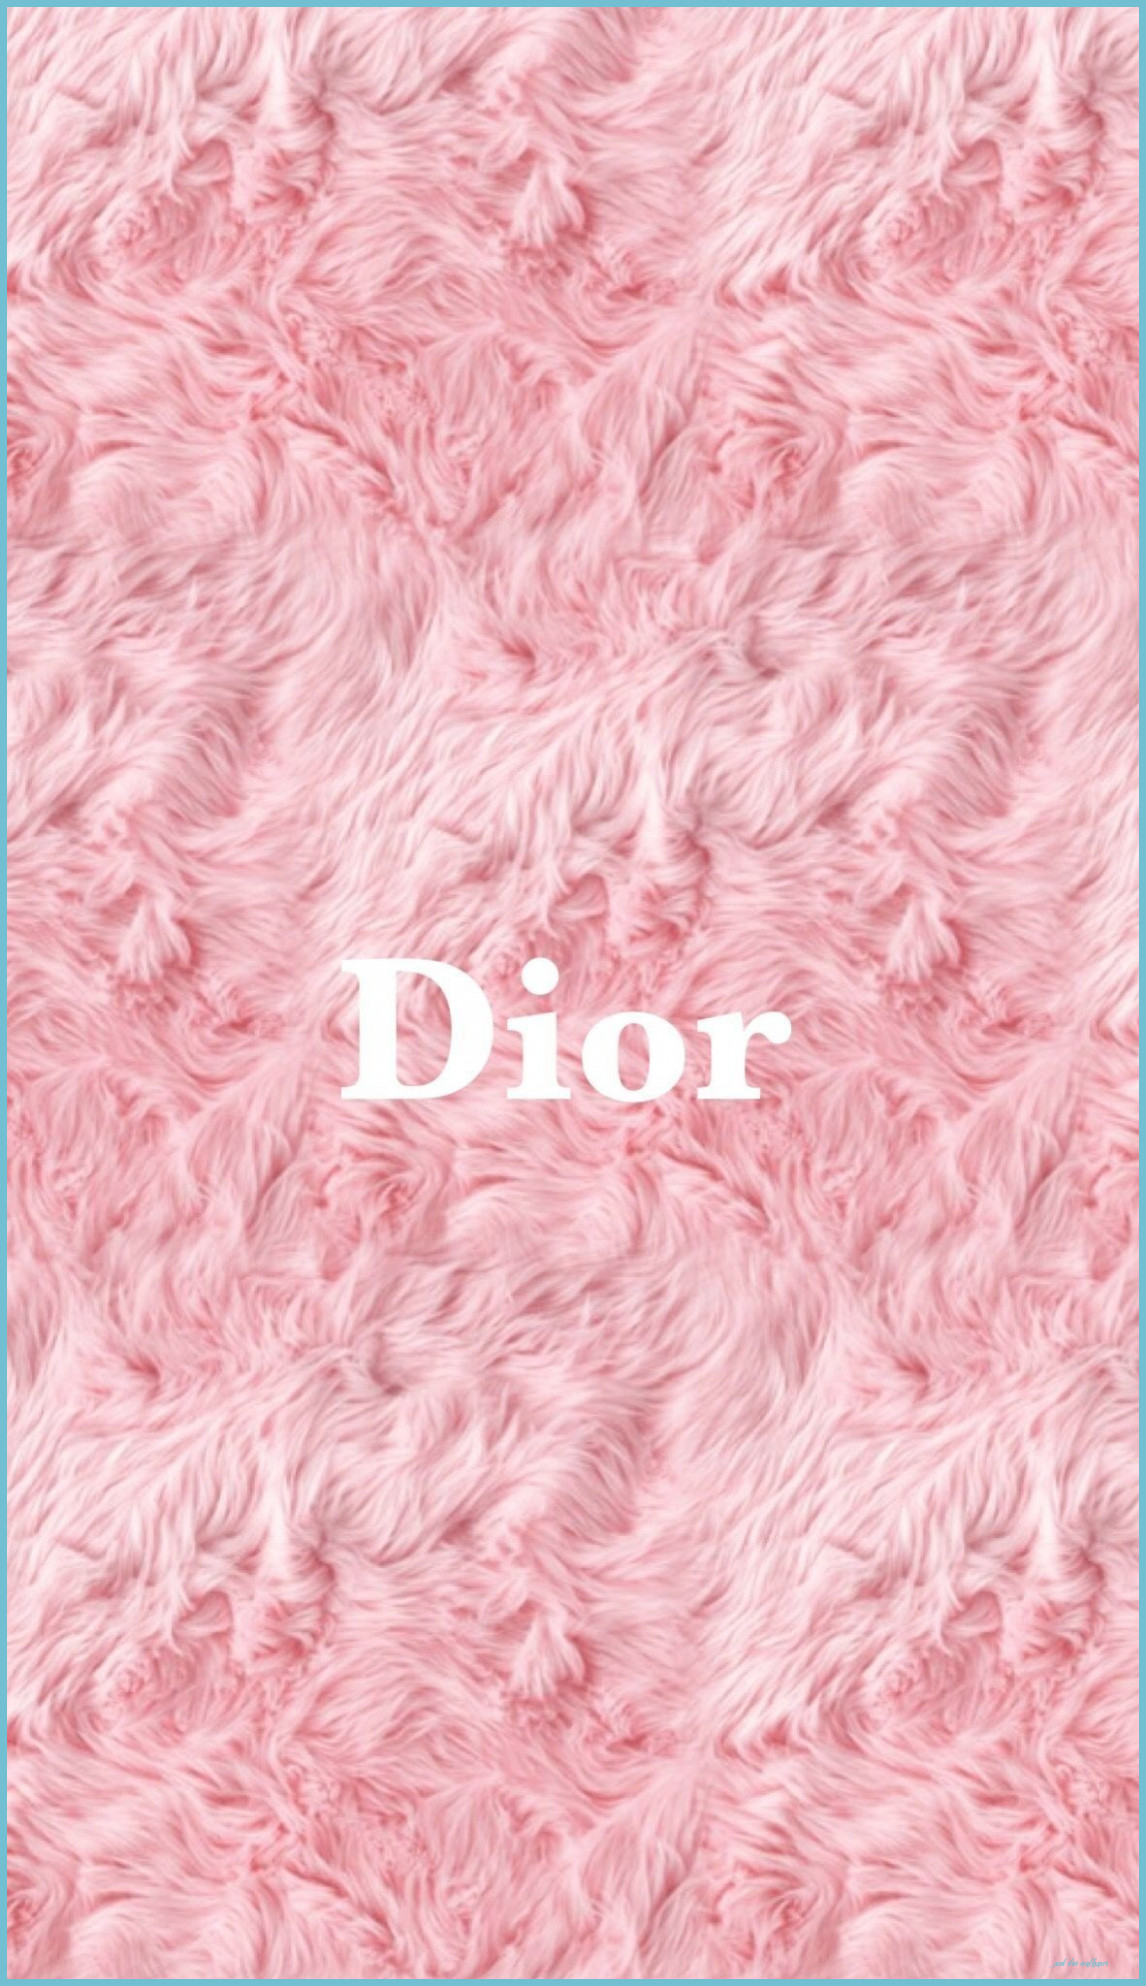 The Latest Trend In Pink Dior Wallpaper. Pink Dior Wallpaper